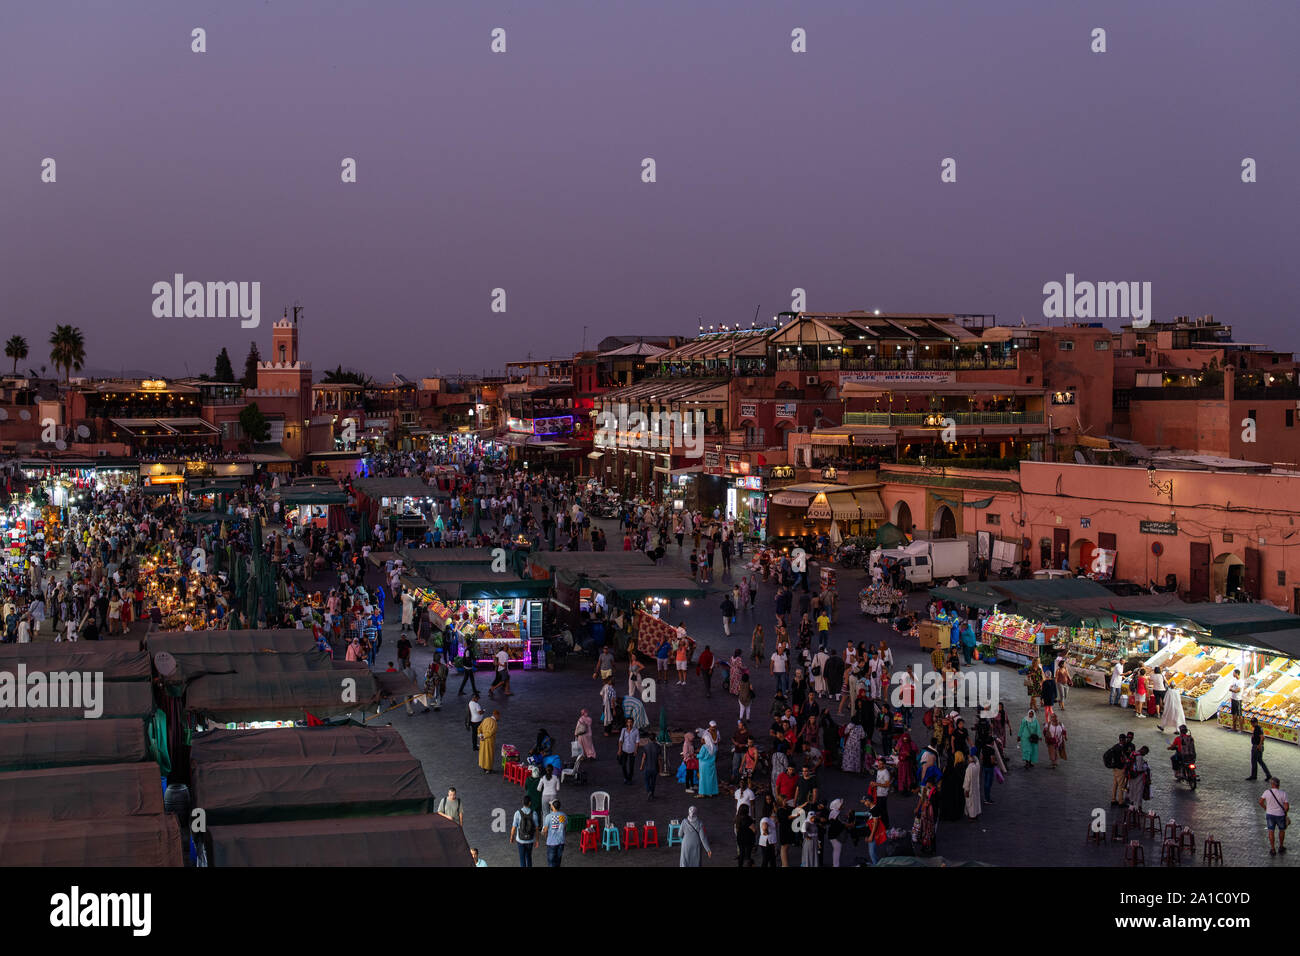 The famous Jamaa el Fna square in Marrakech, Morocco. Jemaa el-Fnaa, Djema el-Fna or Djemaa el-Fnaa is a famous square and market place in Marrakesh's Stock Photo